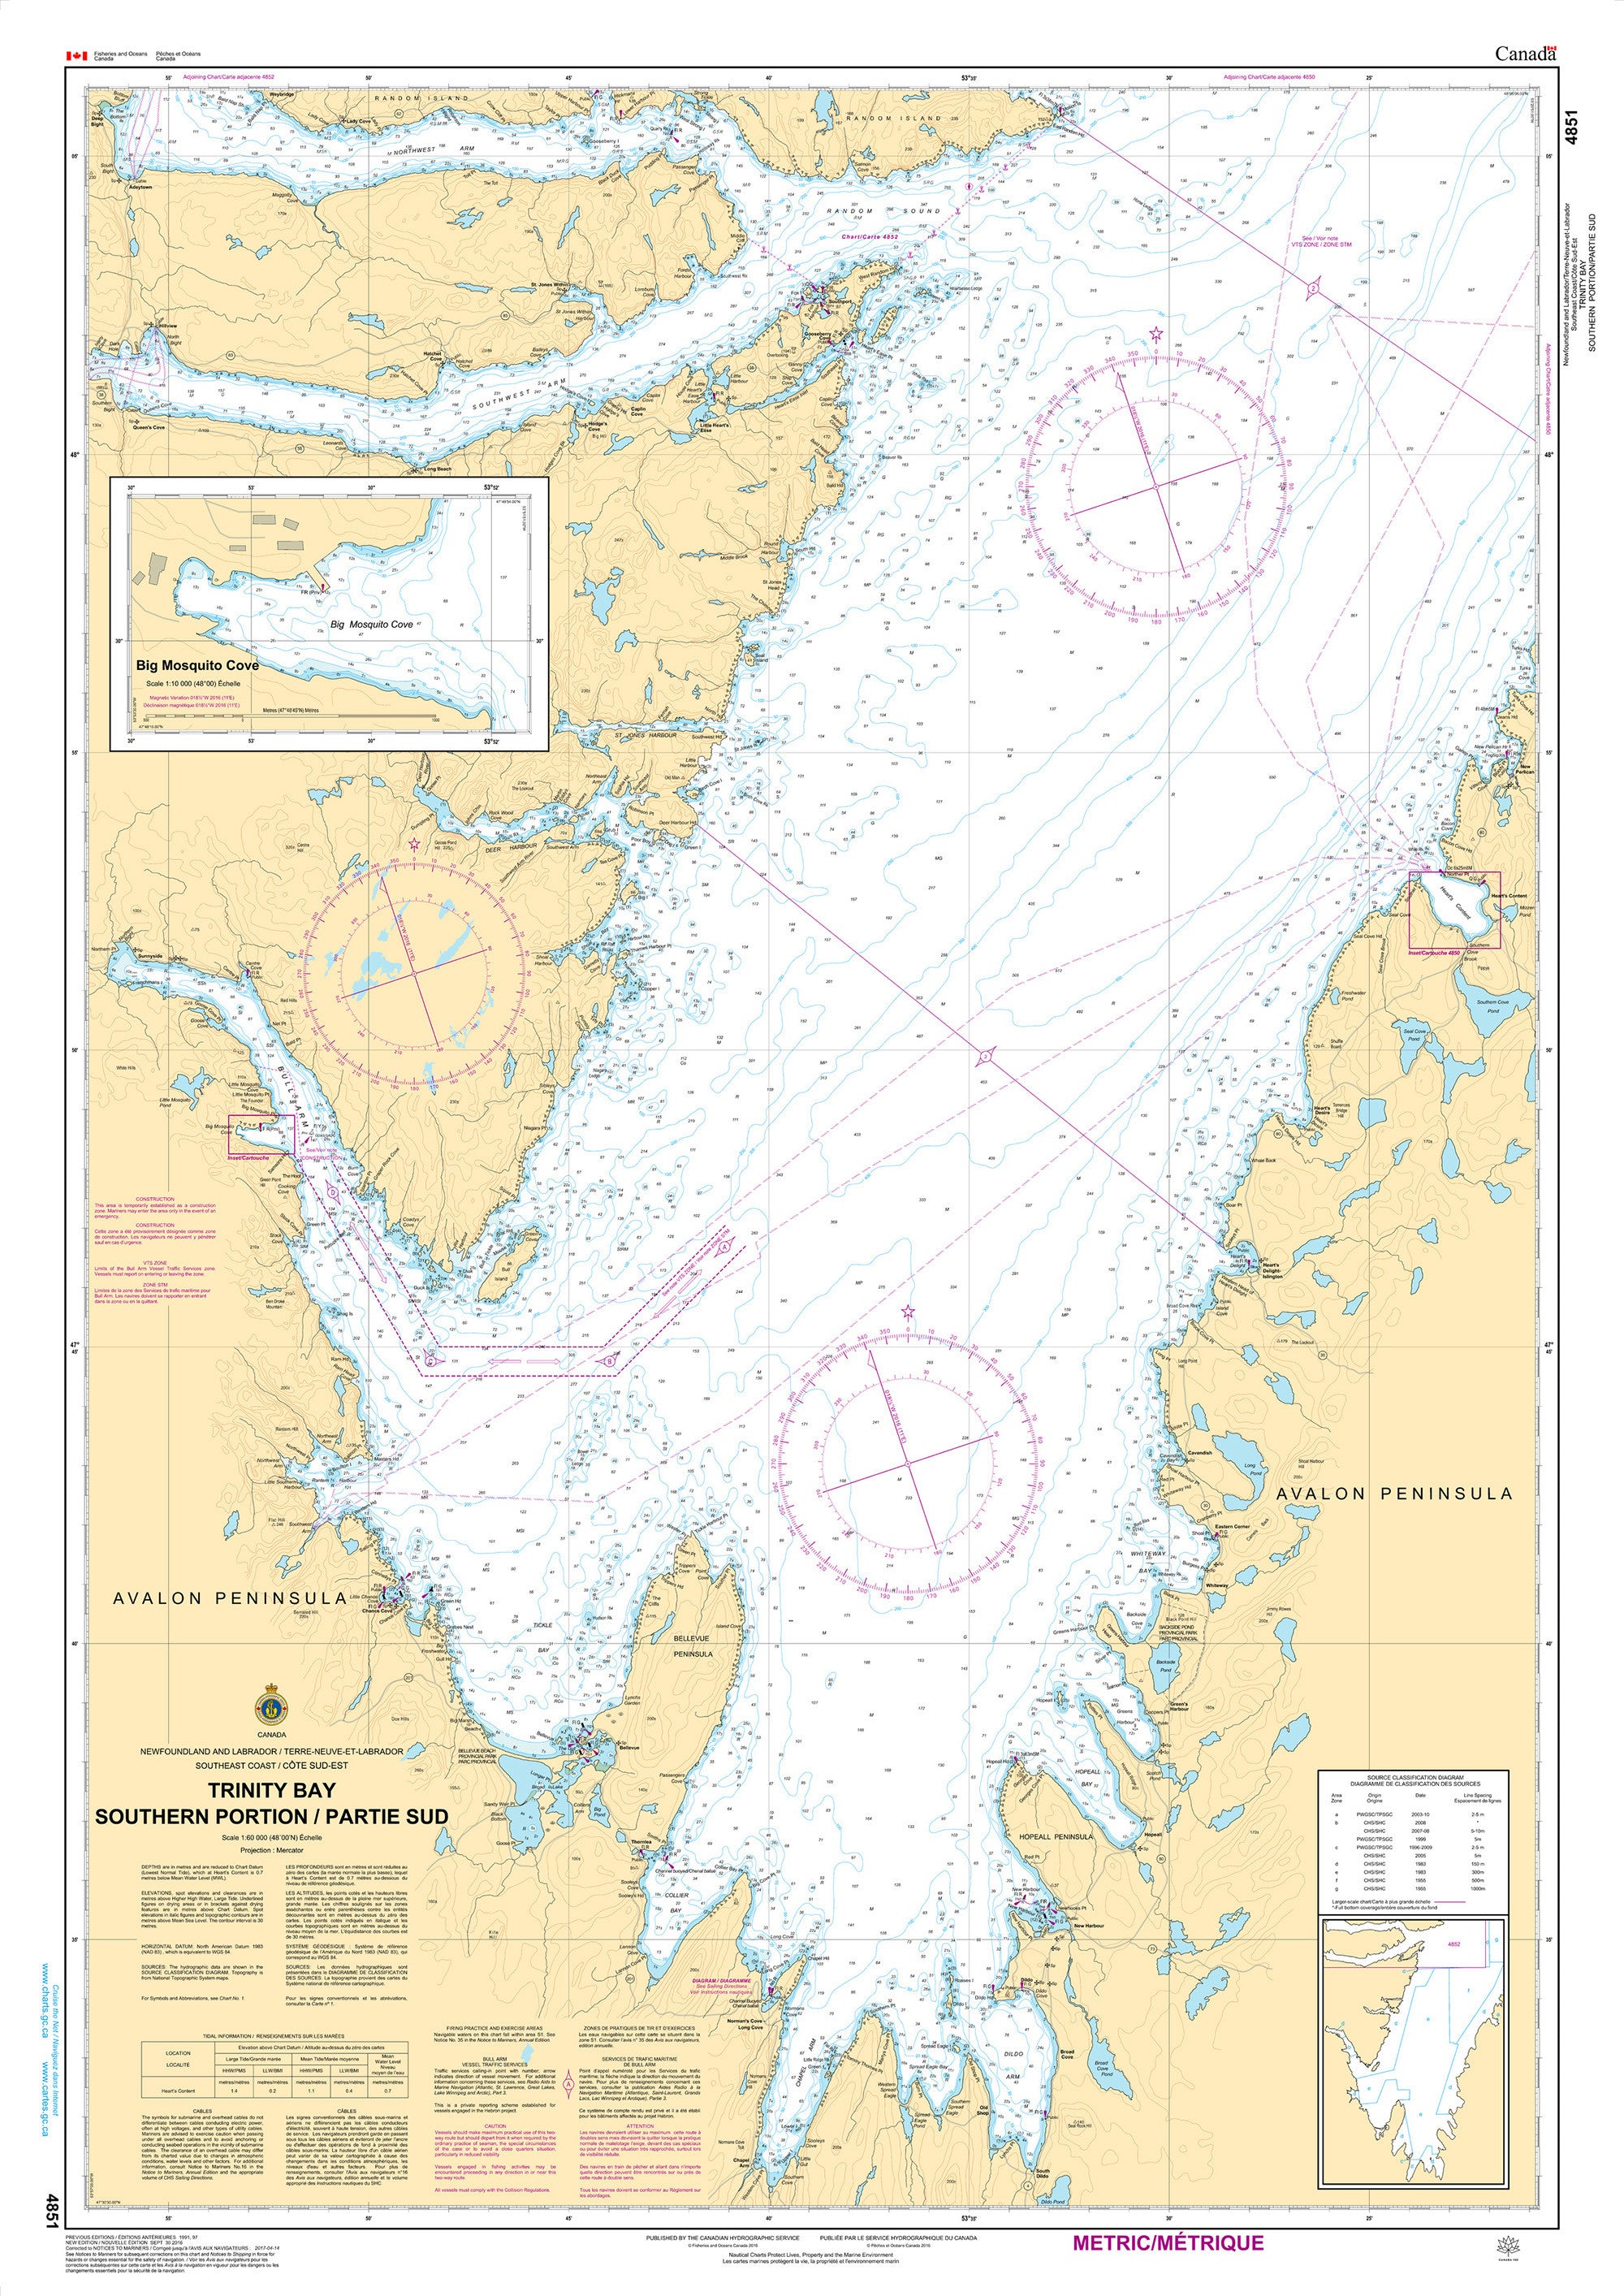 Canadian Hydrographic Service Nautical Chart CHS4851: Trinity Bay - Southern Portion/Partie Sud